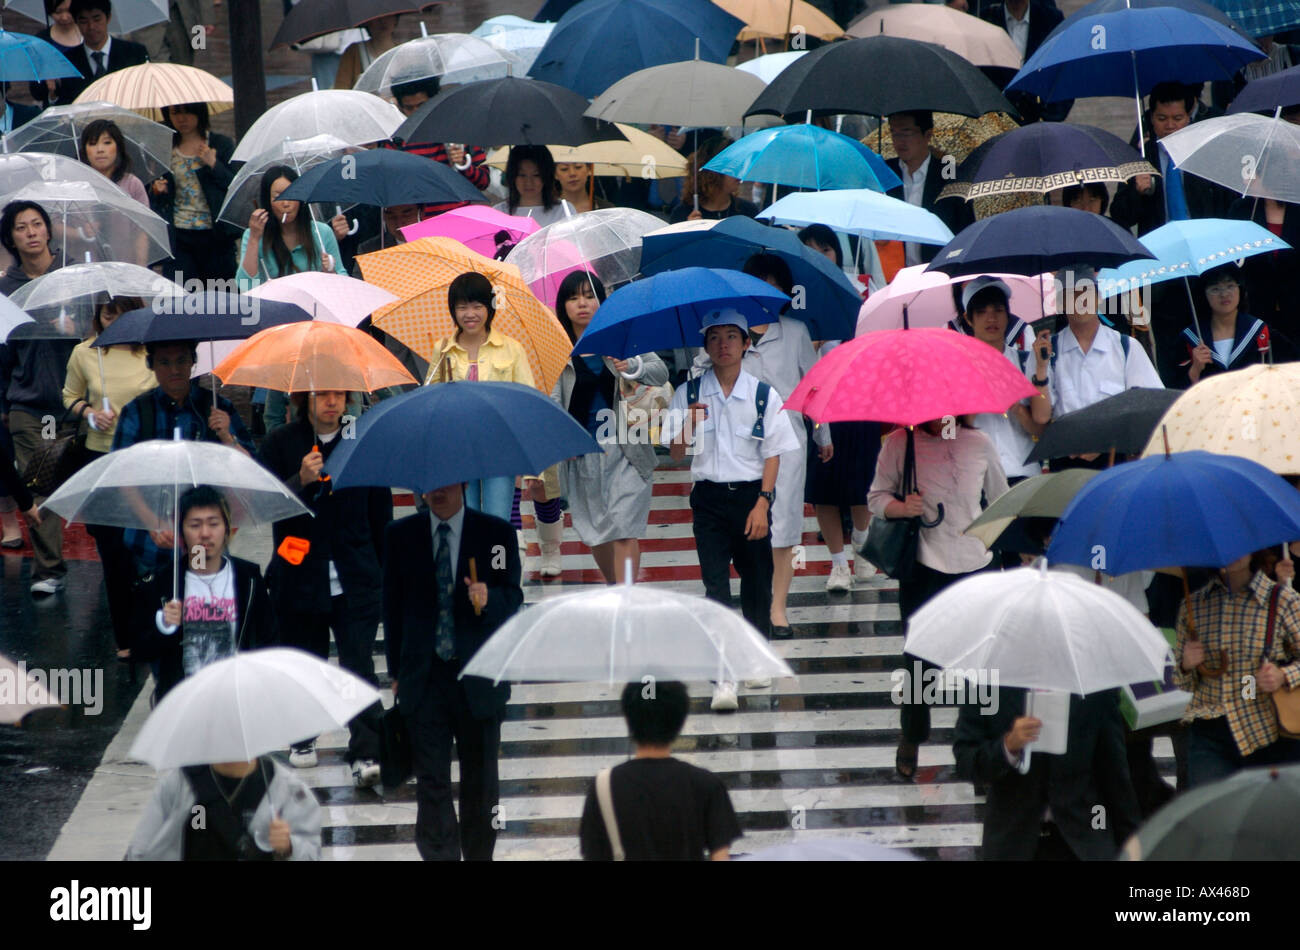 Crowds of workers make their way to work in the rain in Shibuya Tokyo Japan Stock Photo